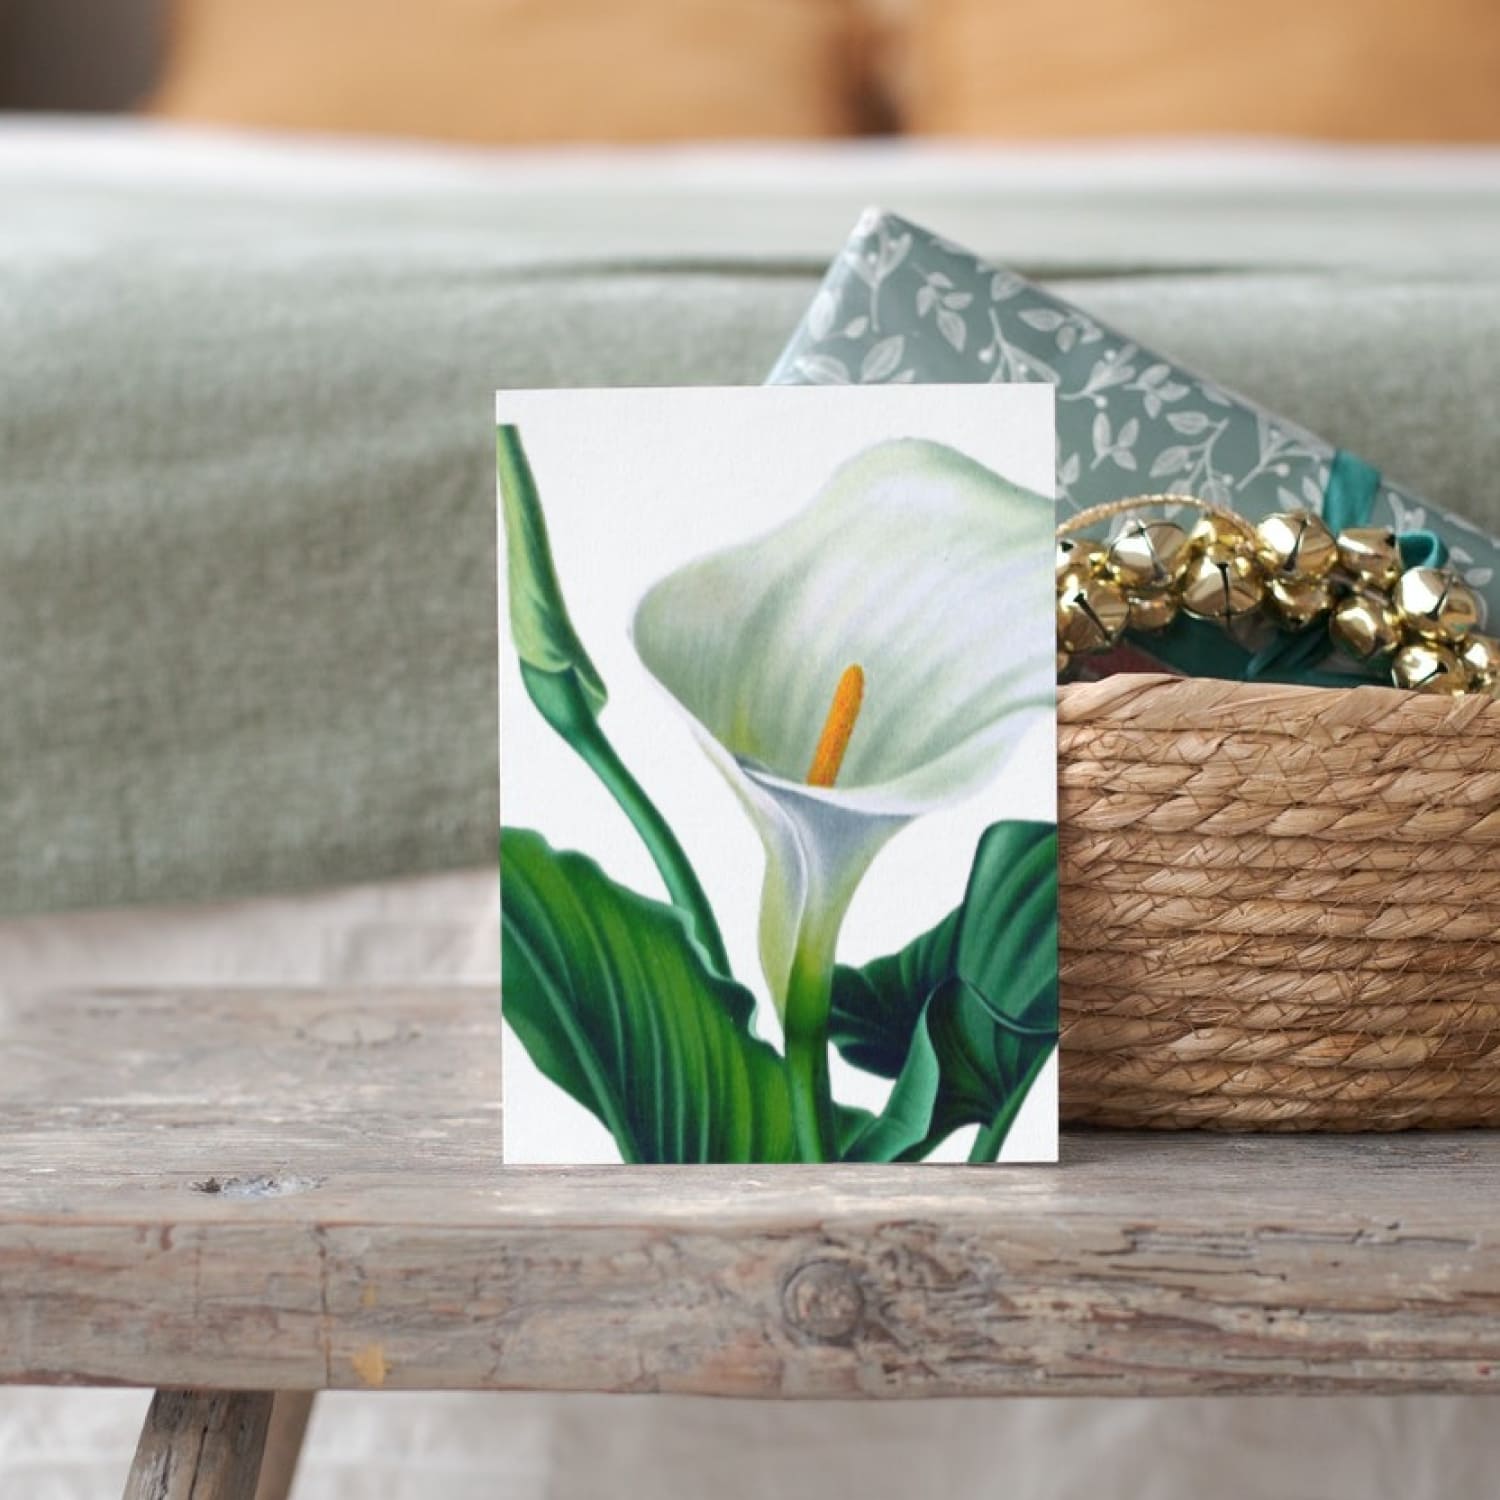 The handpicked lilies have been carefully color corrected to look fresh and new.